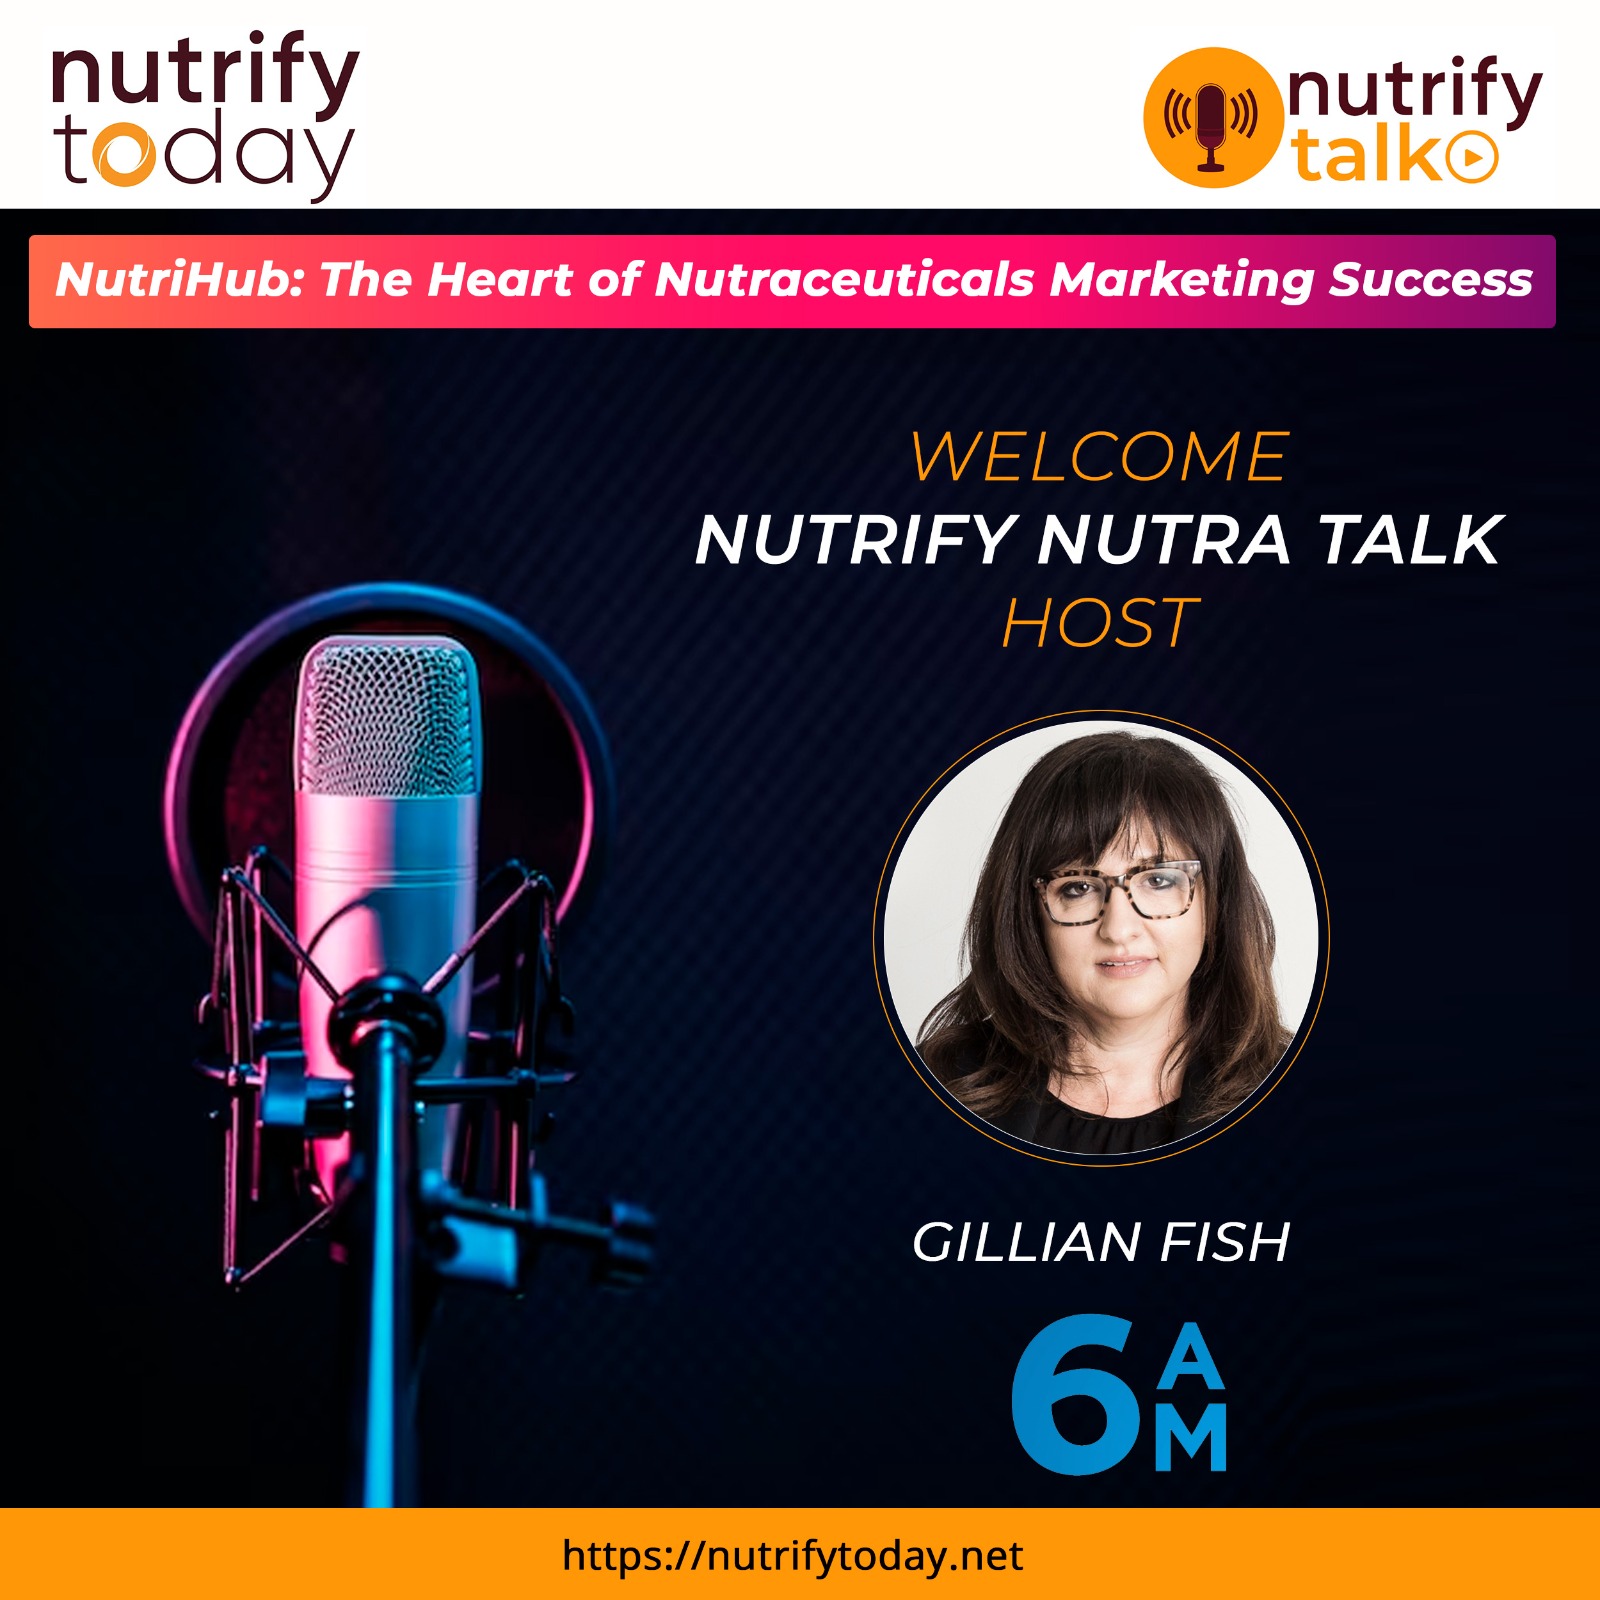 Nutrify Today launches “Nutrihub: The Heart of Nutraceuticals Marketing Success” podcast series on its Nutrifytoday Phone app